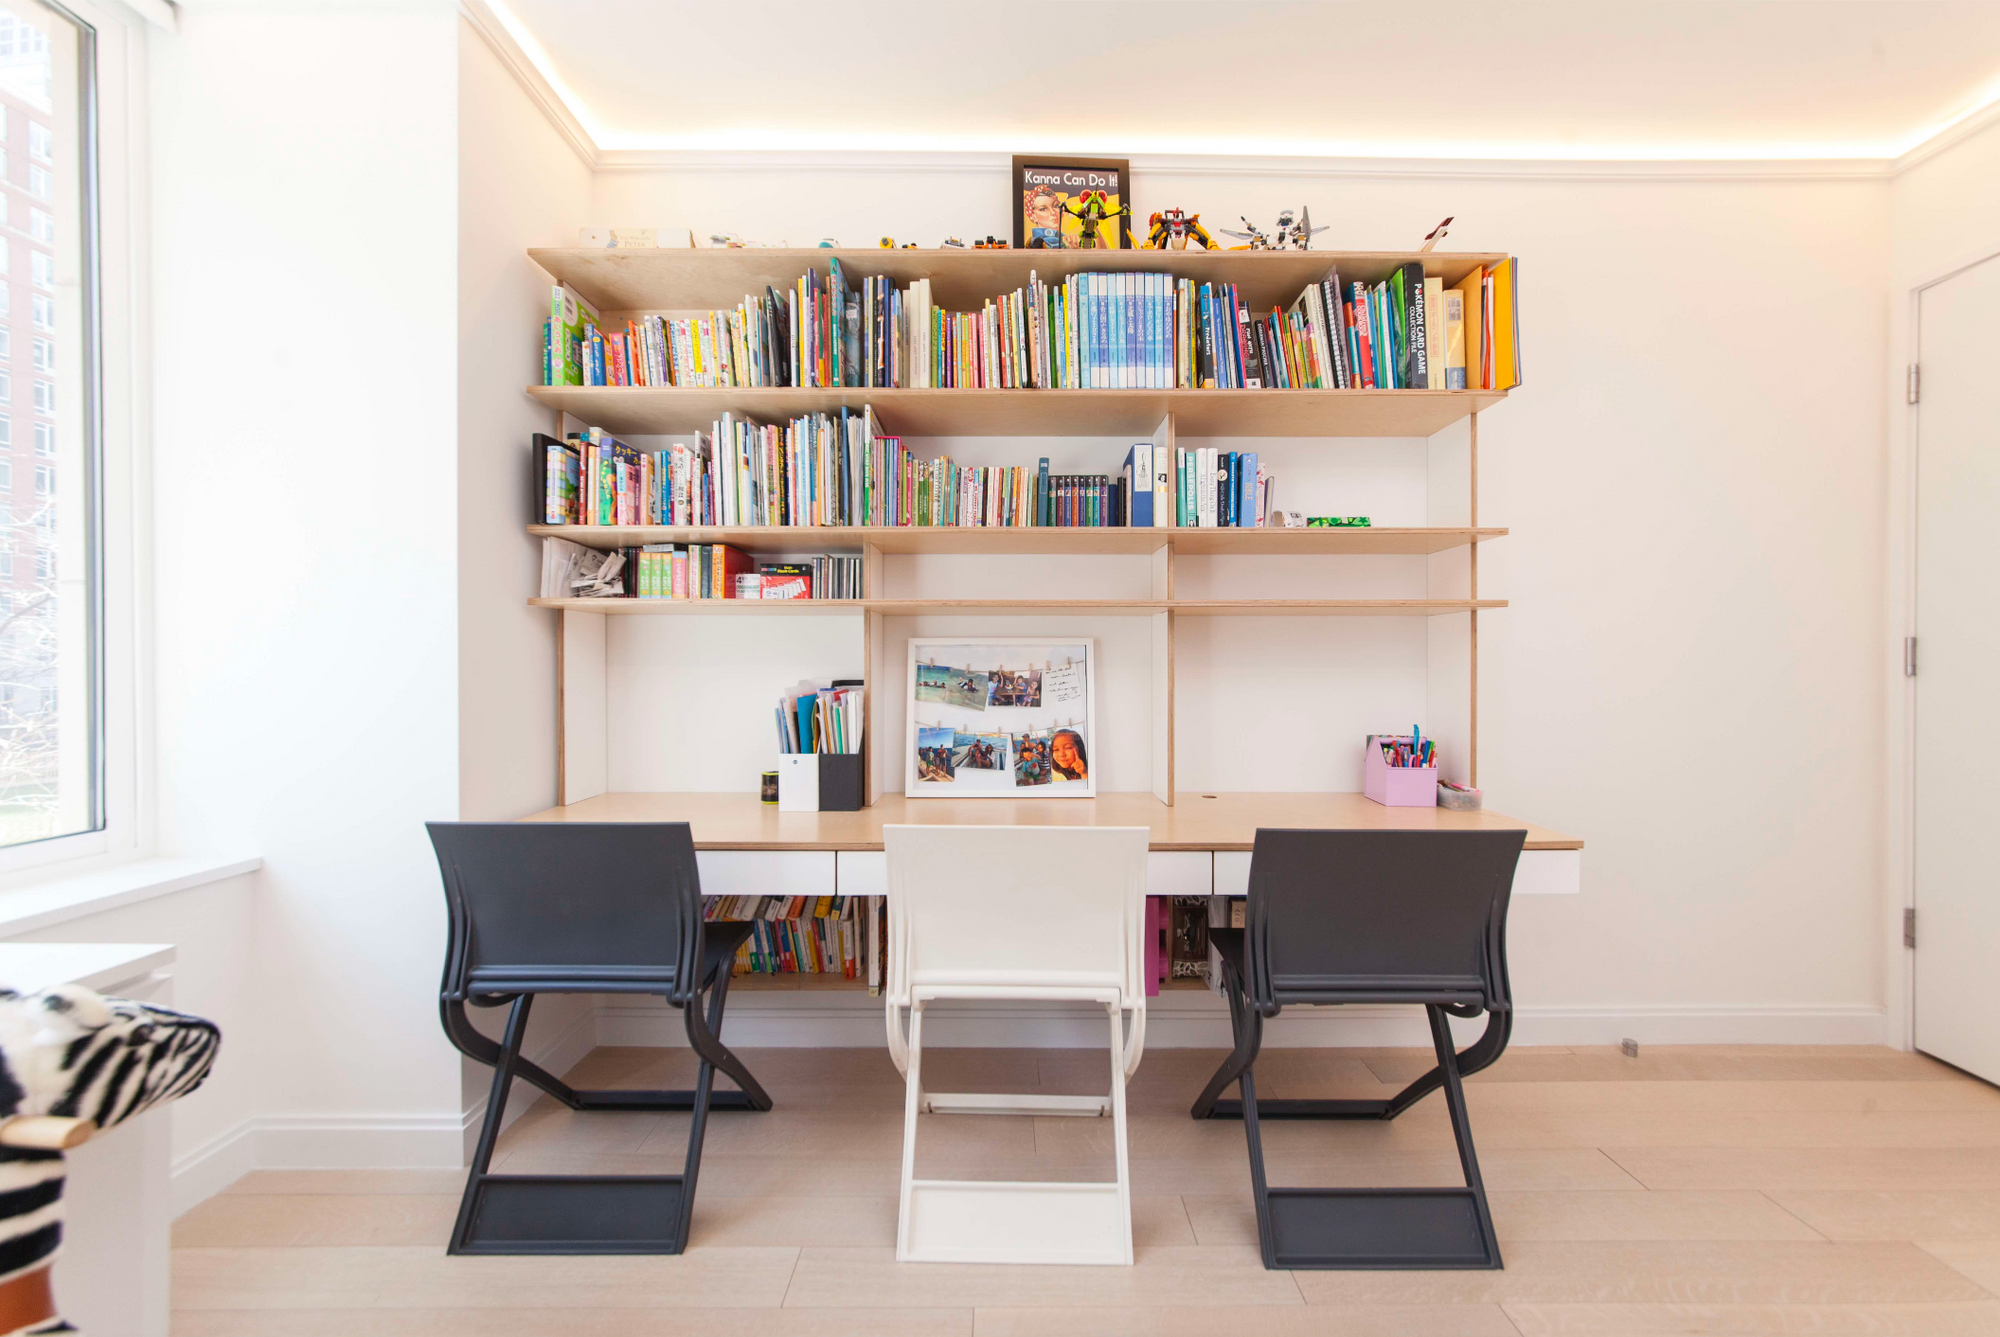 5 Tips for Sharing Spaces at Home